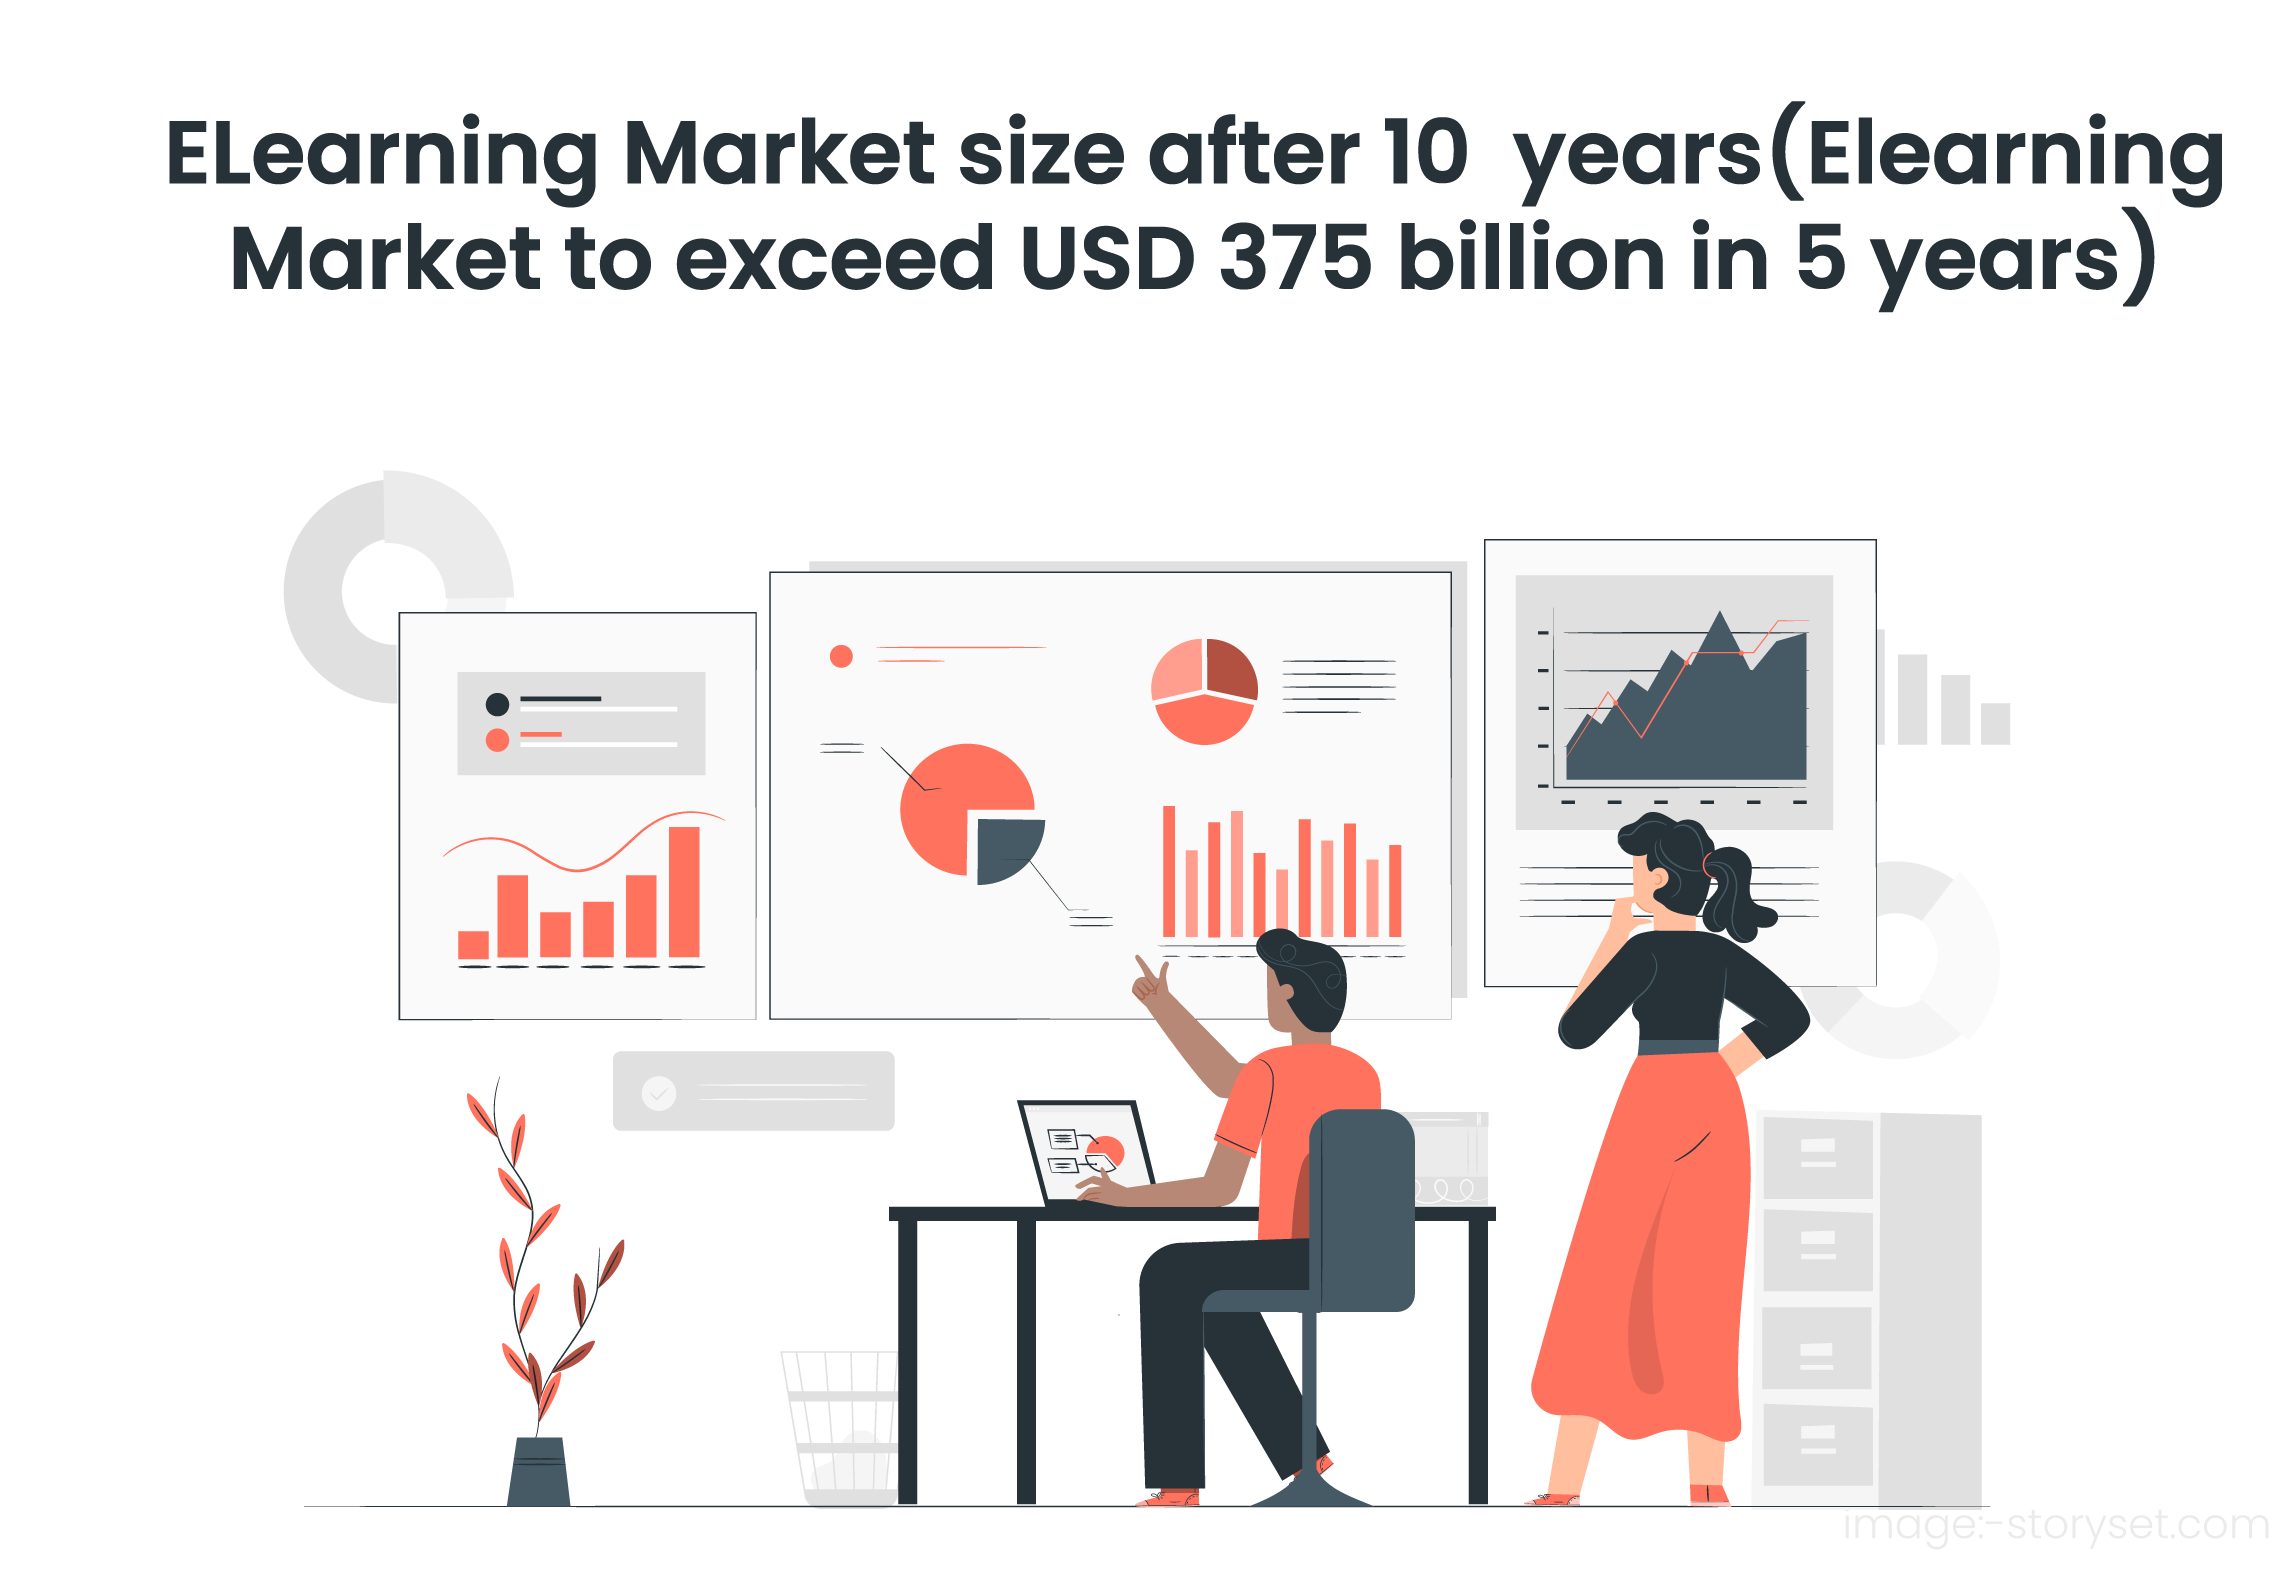 What would be the market size of E-learning in 10 years?